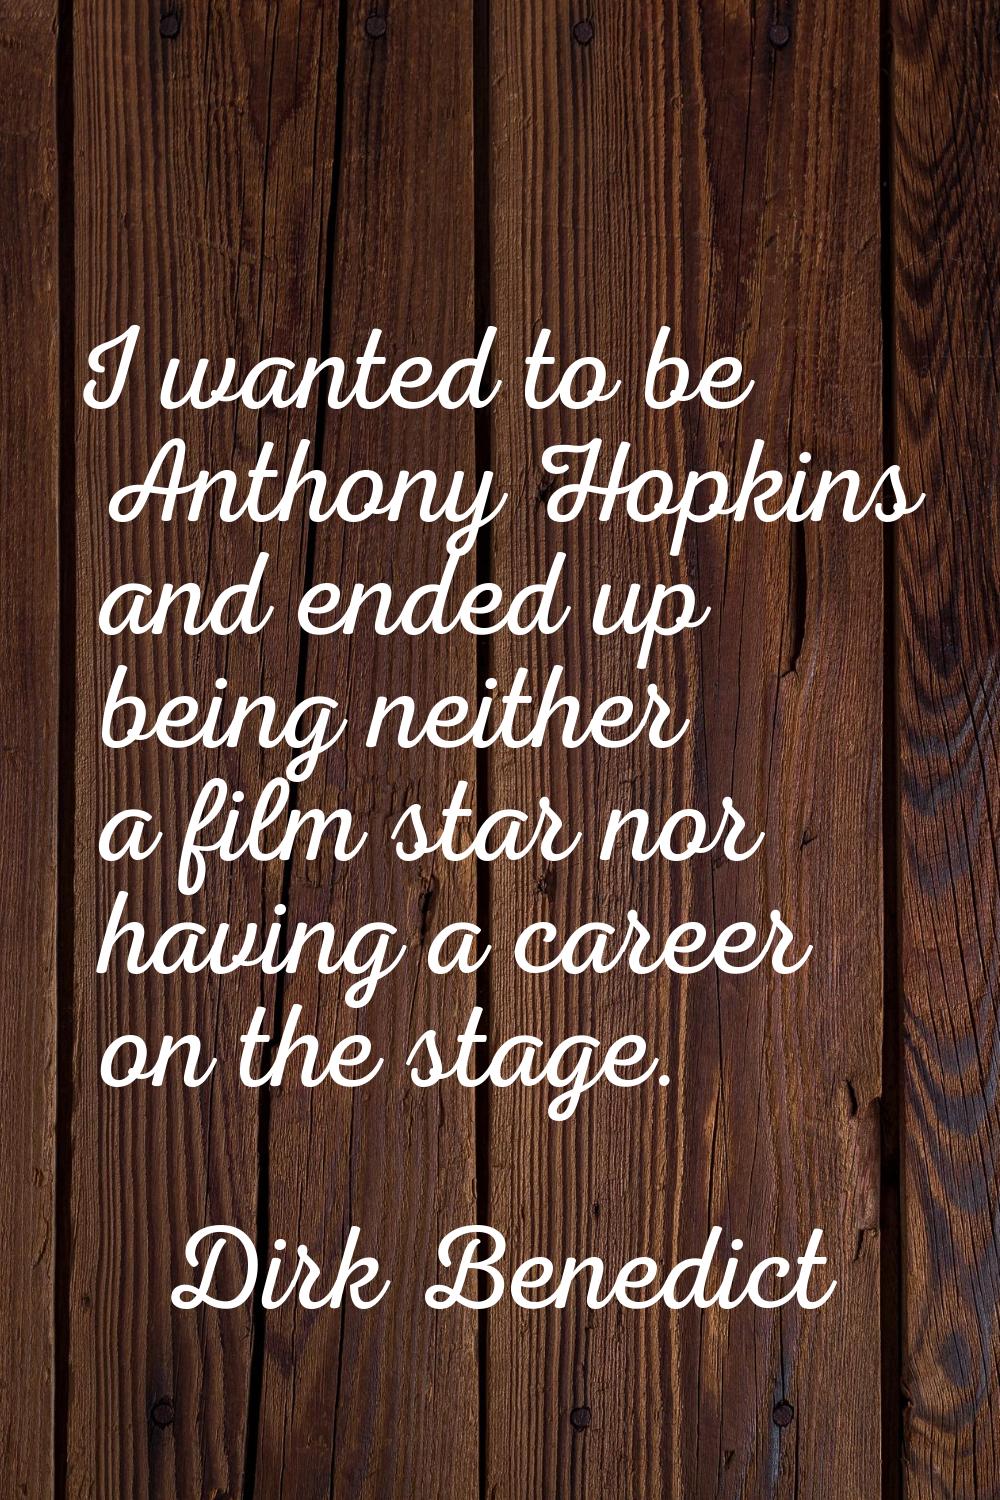 I wanted to be Anthony Hopkins and ended up being neither a film star nor having a career on the st